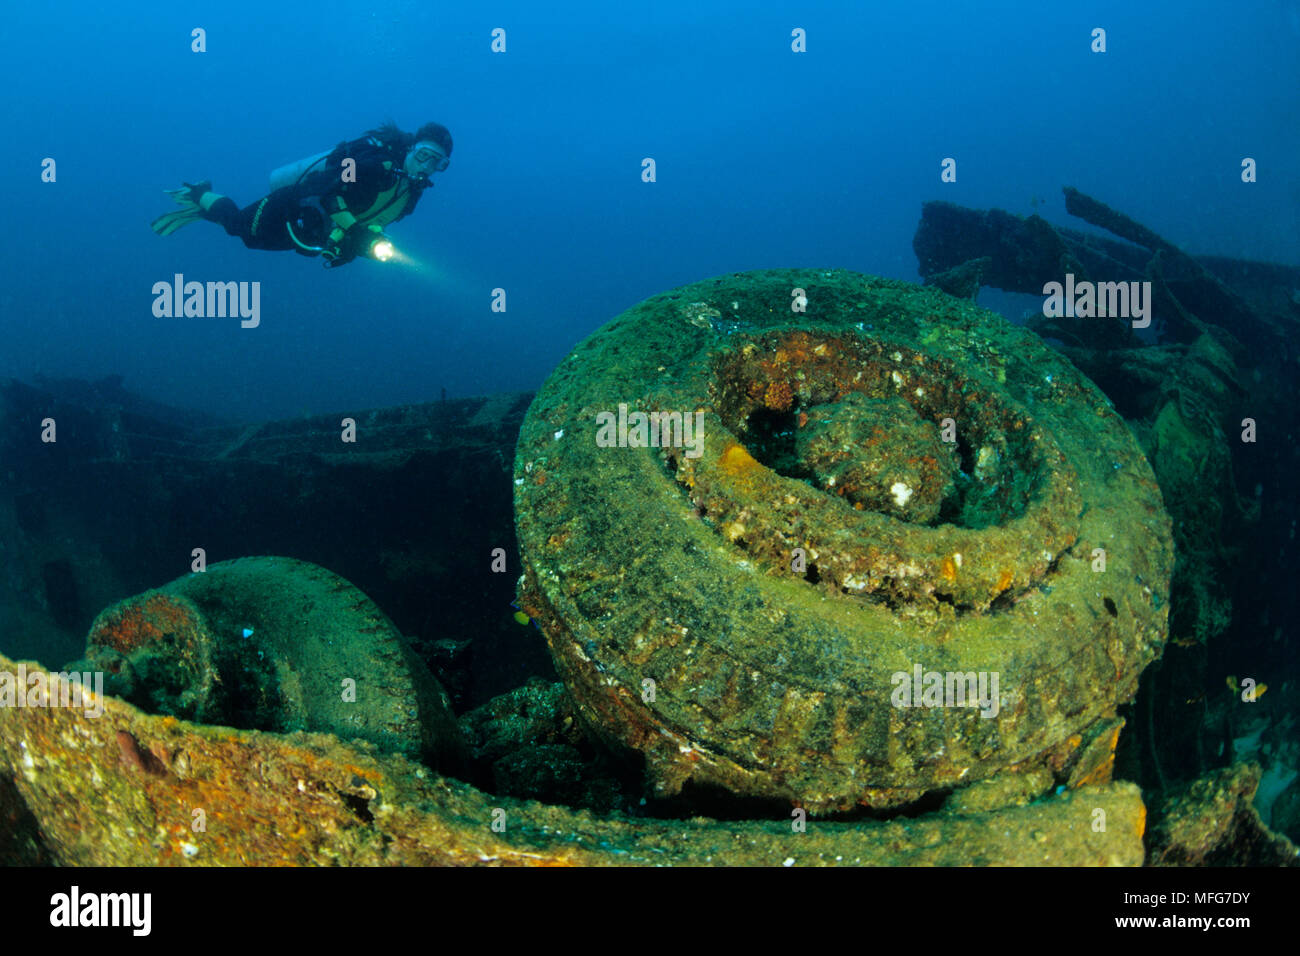 scuba diver and truck's wheels on the Salvatierra wreck, Antipathes galapagensis, Sea of Cortez Baja California, Mexico, East Pacific Ocean  Date: 24. Stock Photo